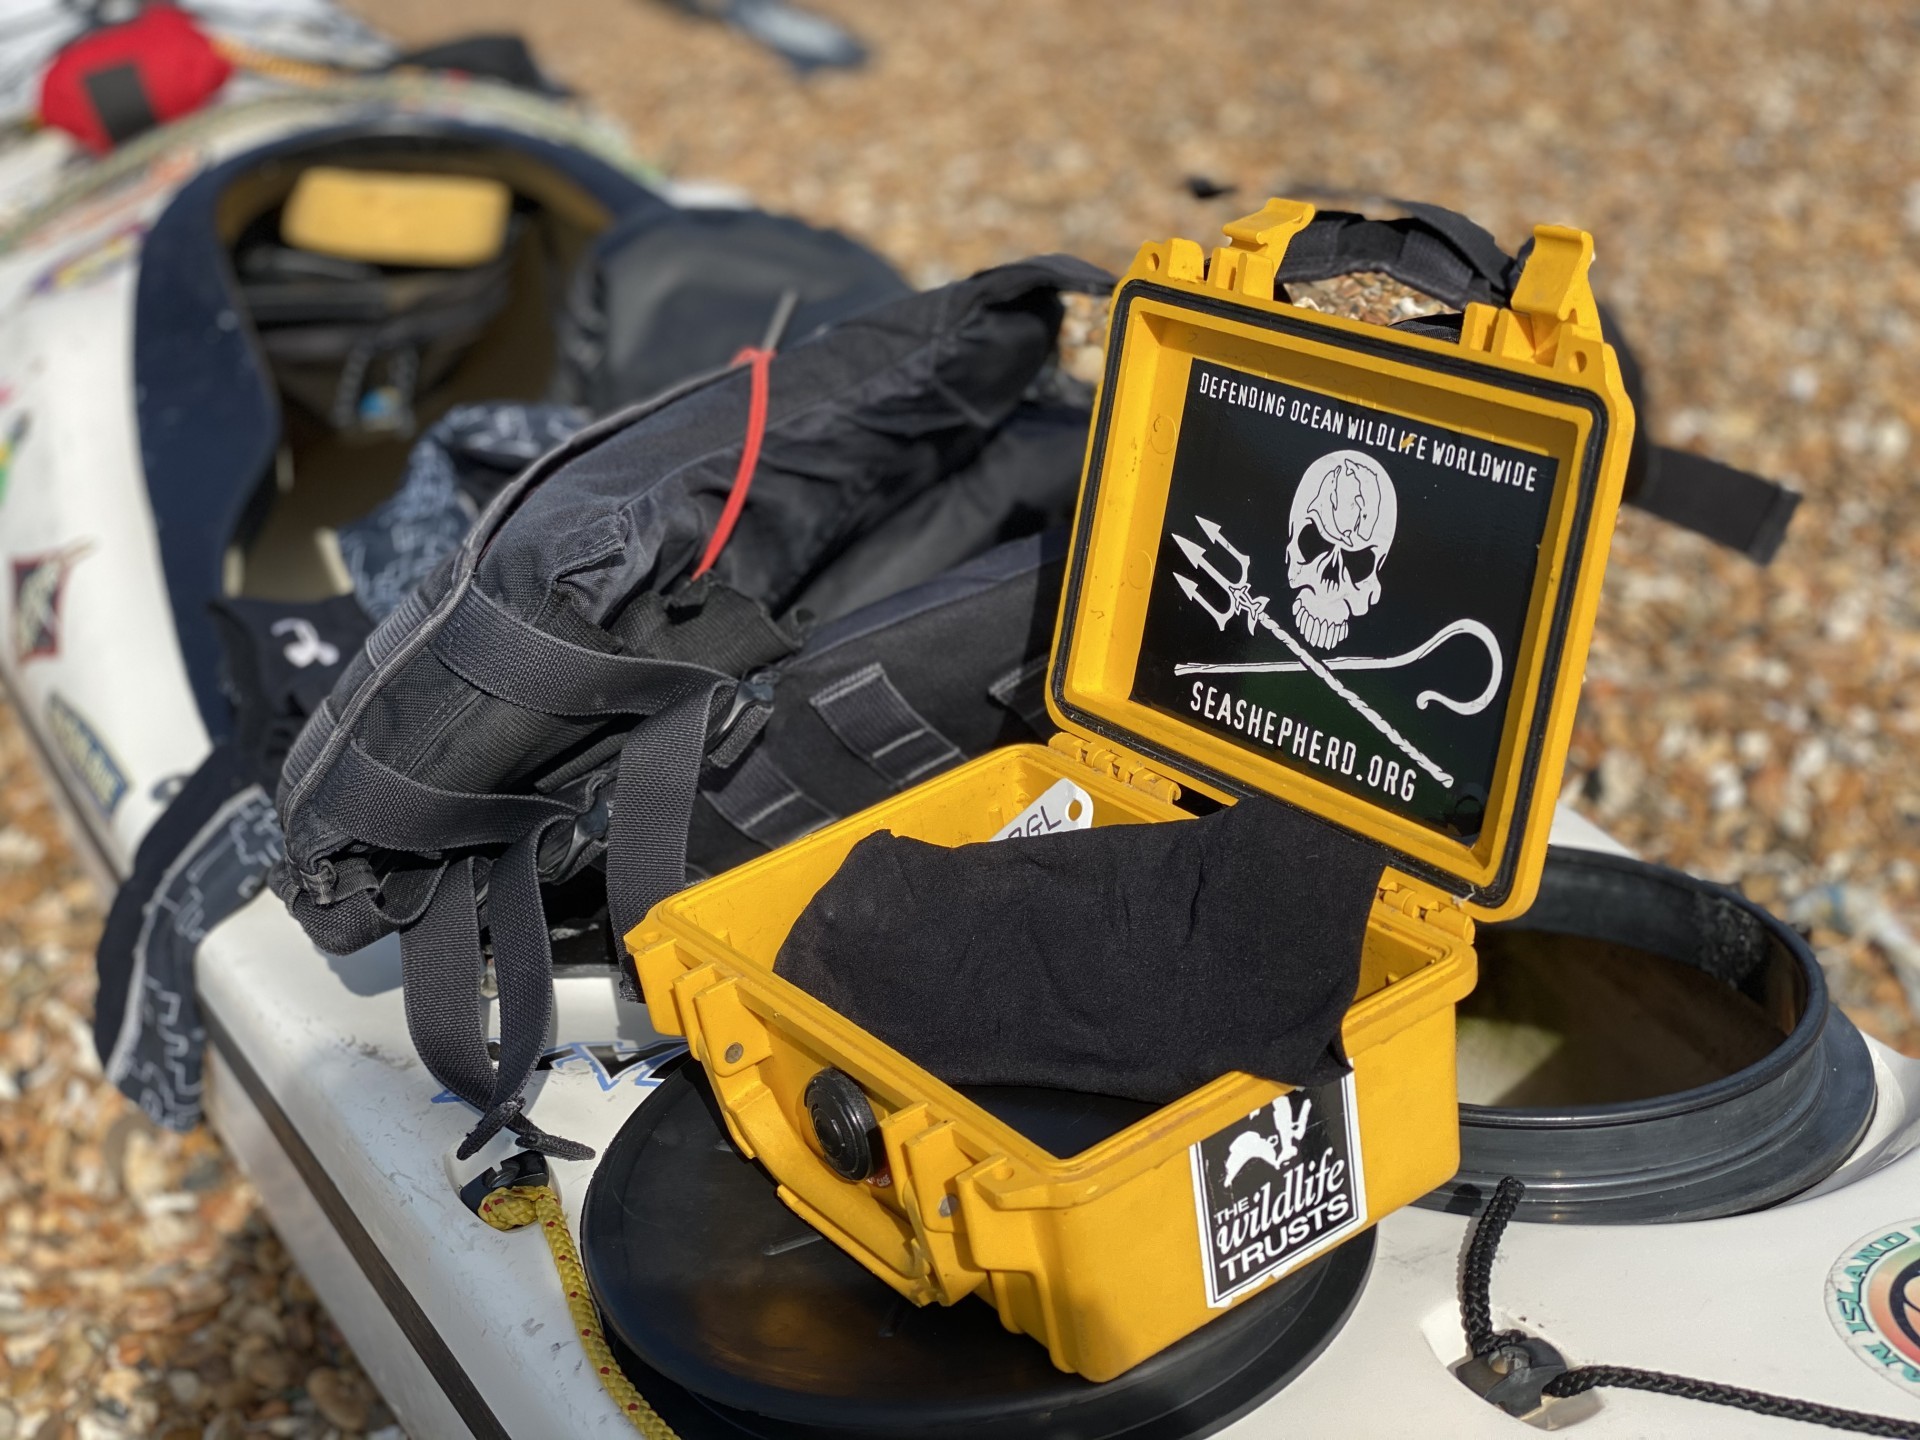 A Peli box for waterproofing valuable items sitting open on a sea kayak.